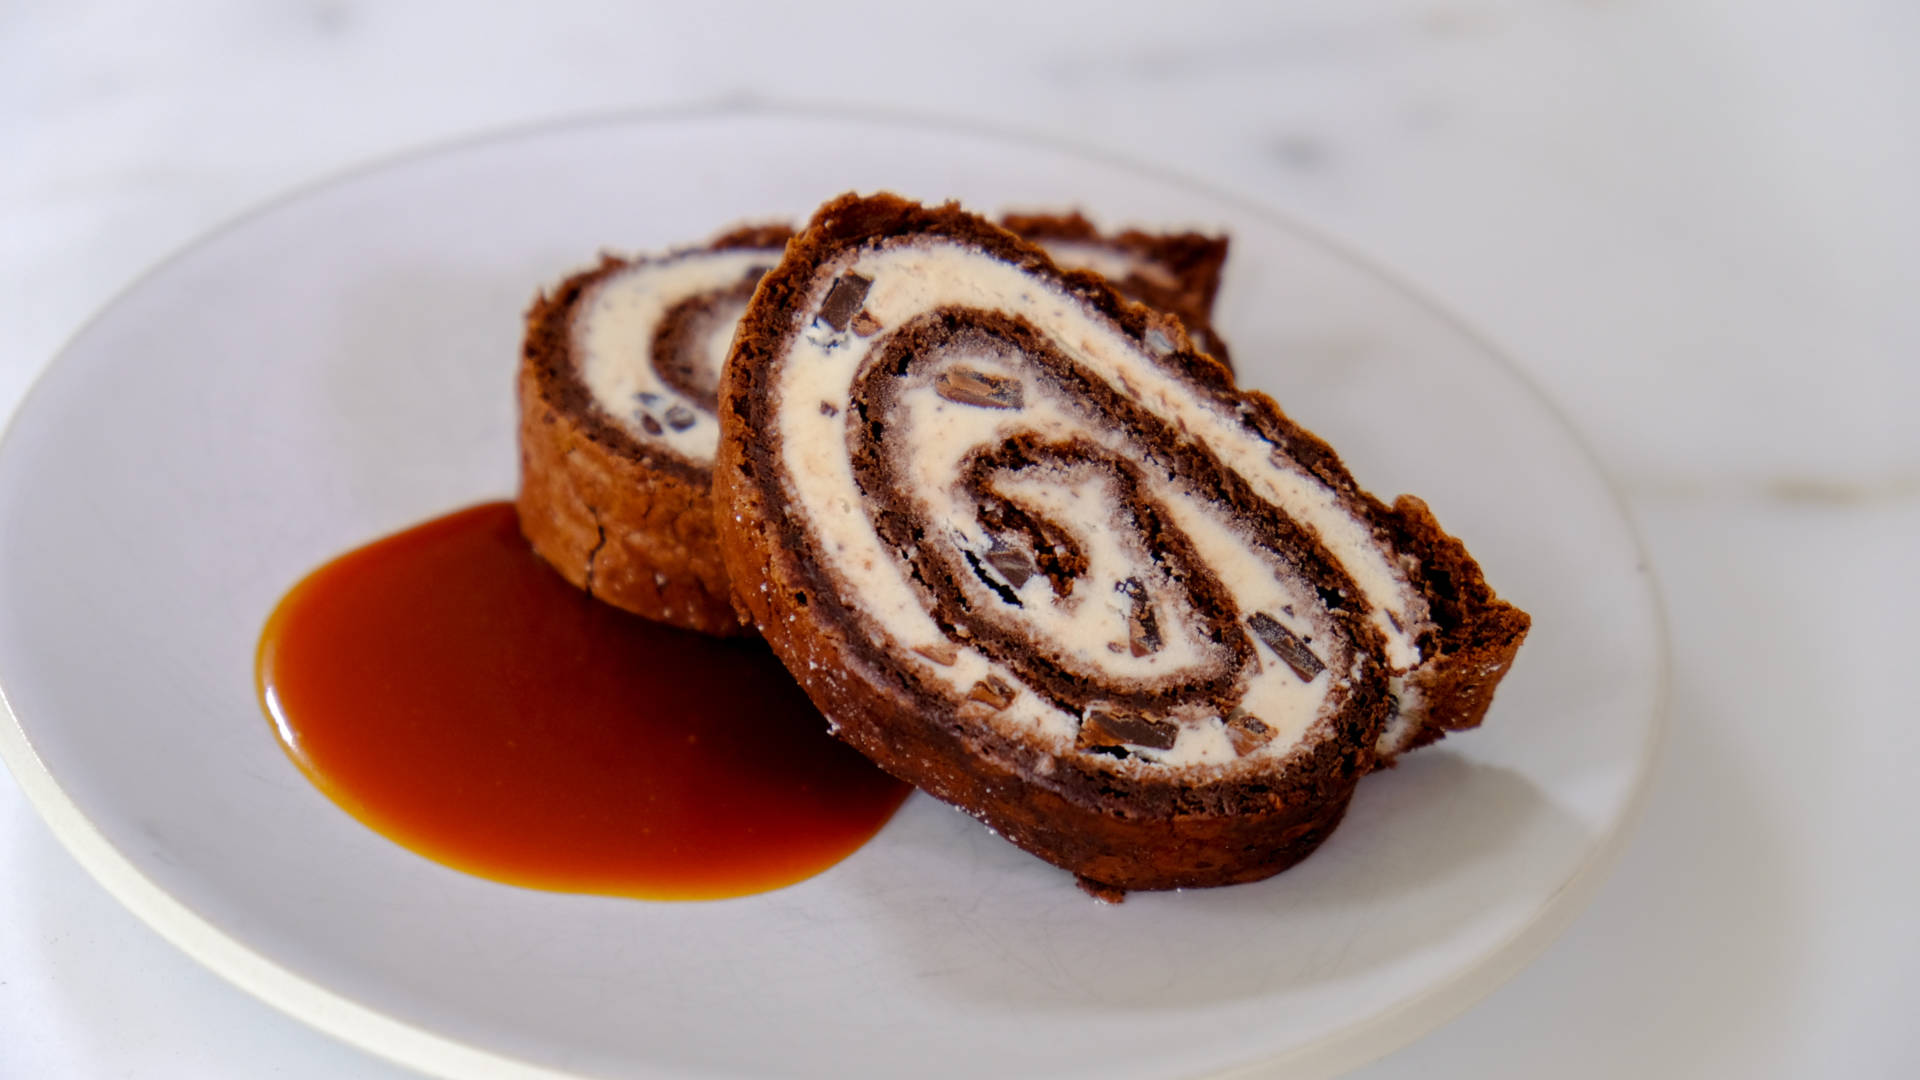 Chocolate roulade filled with chocolate chip ice cream and topped with the best caramel sauce.